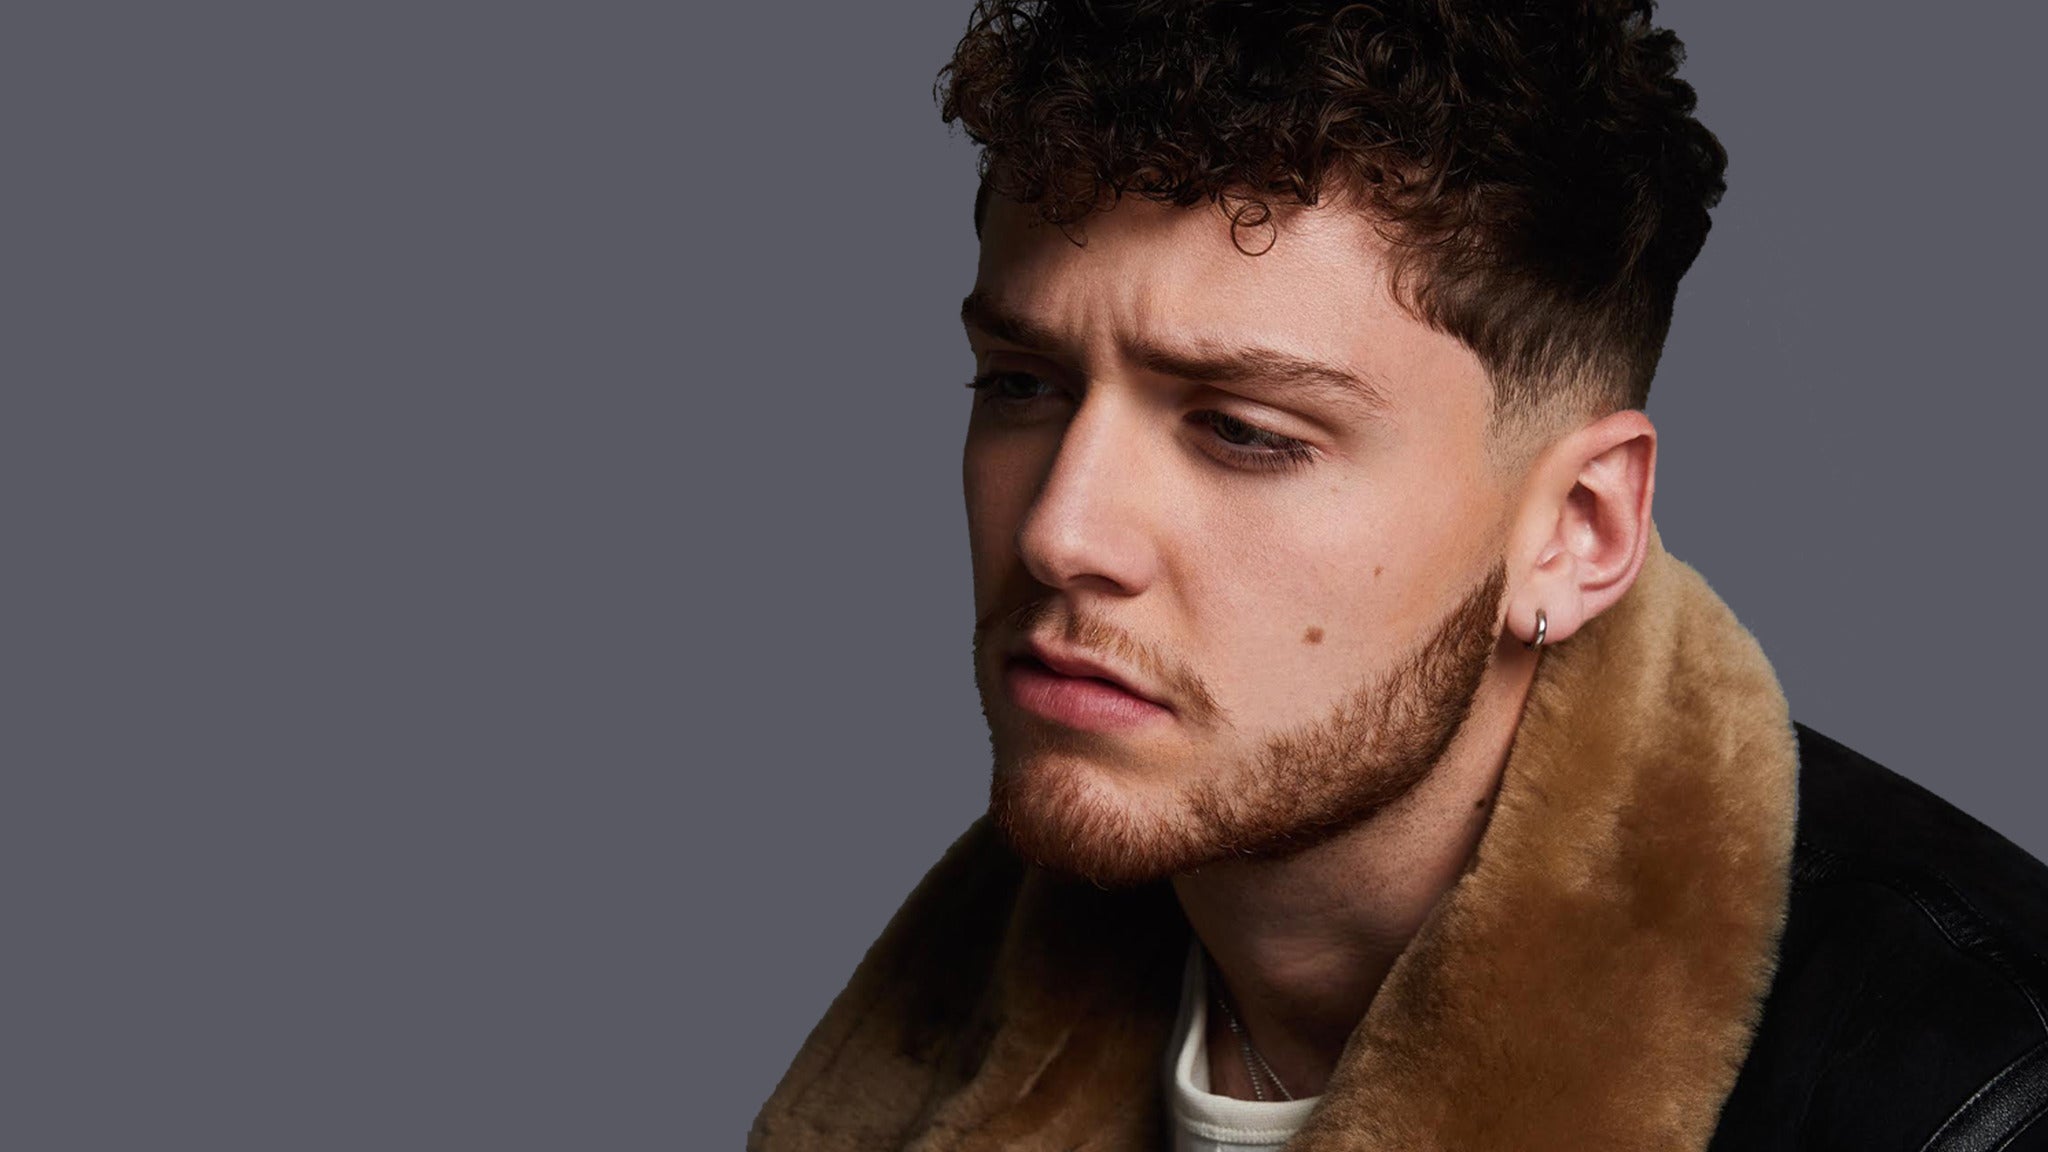 Bazzi - The Cosmic Tour in Chicago promo photo for Live Nation Mobile presale offer code